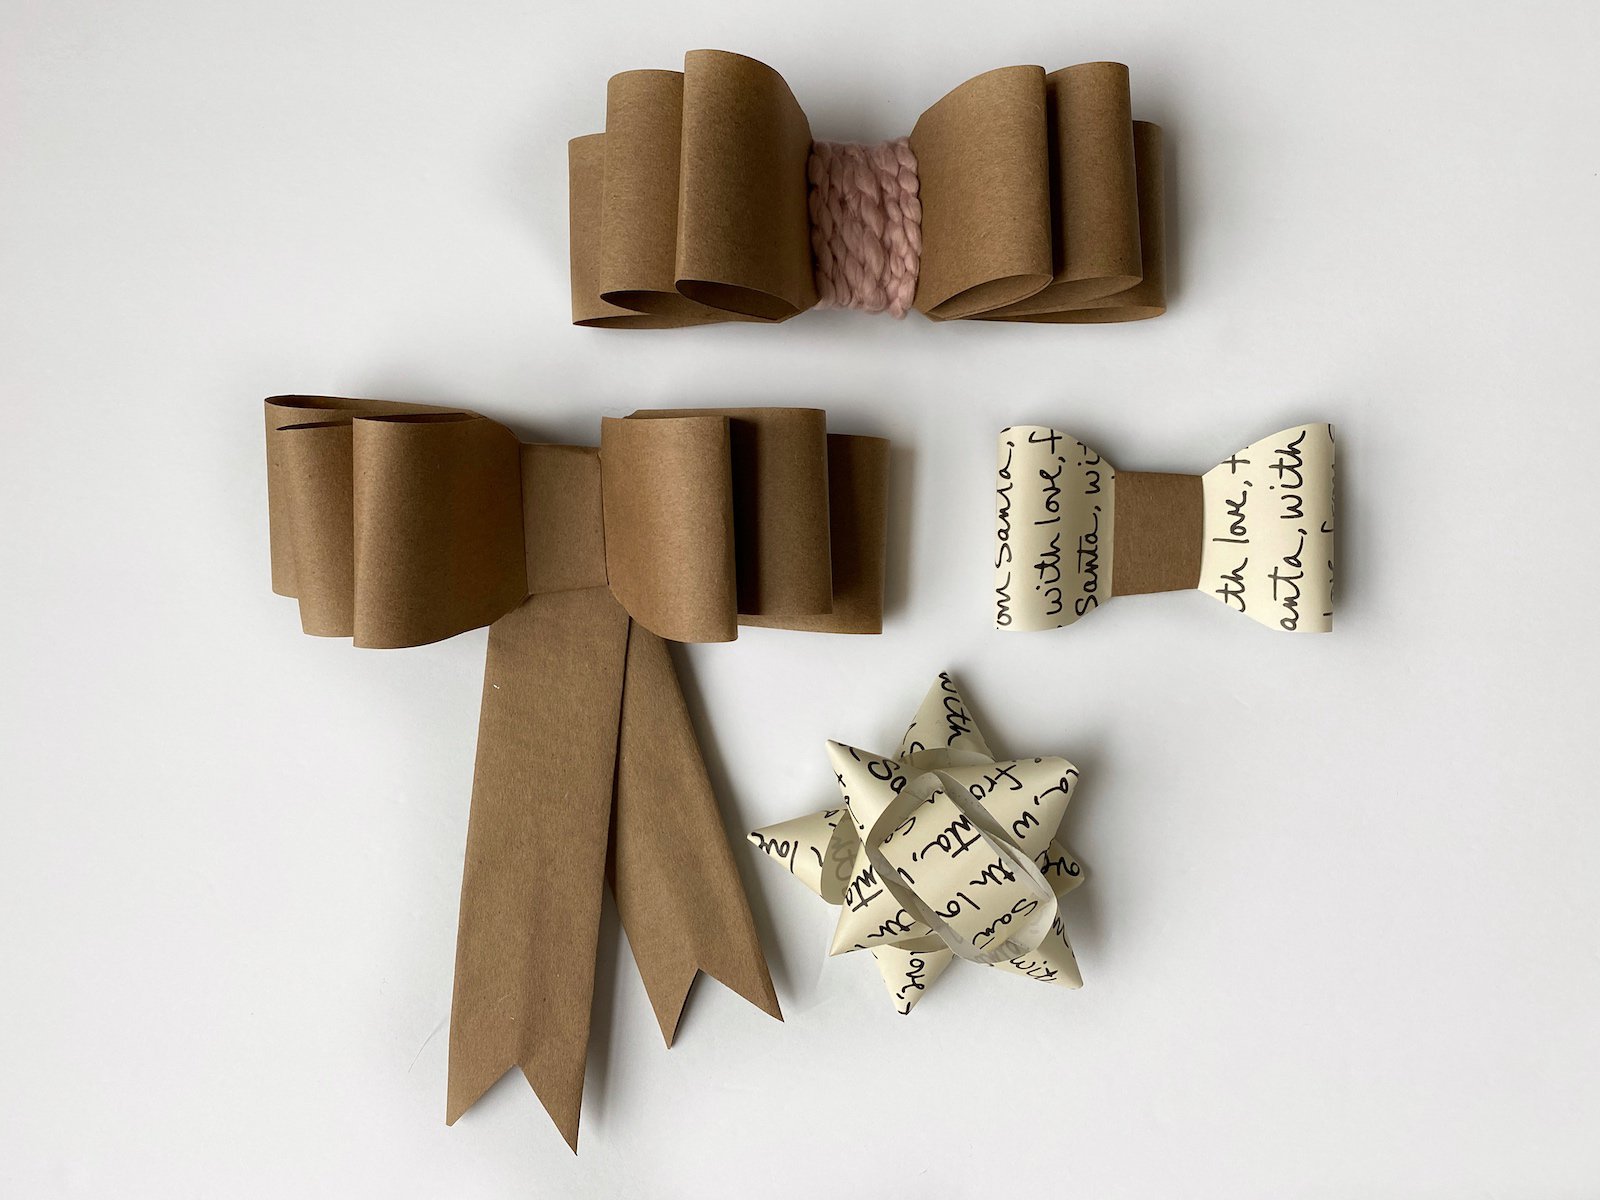 How To Make A Bow Out Of Wrapping Paper: 4 Easy Ways